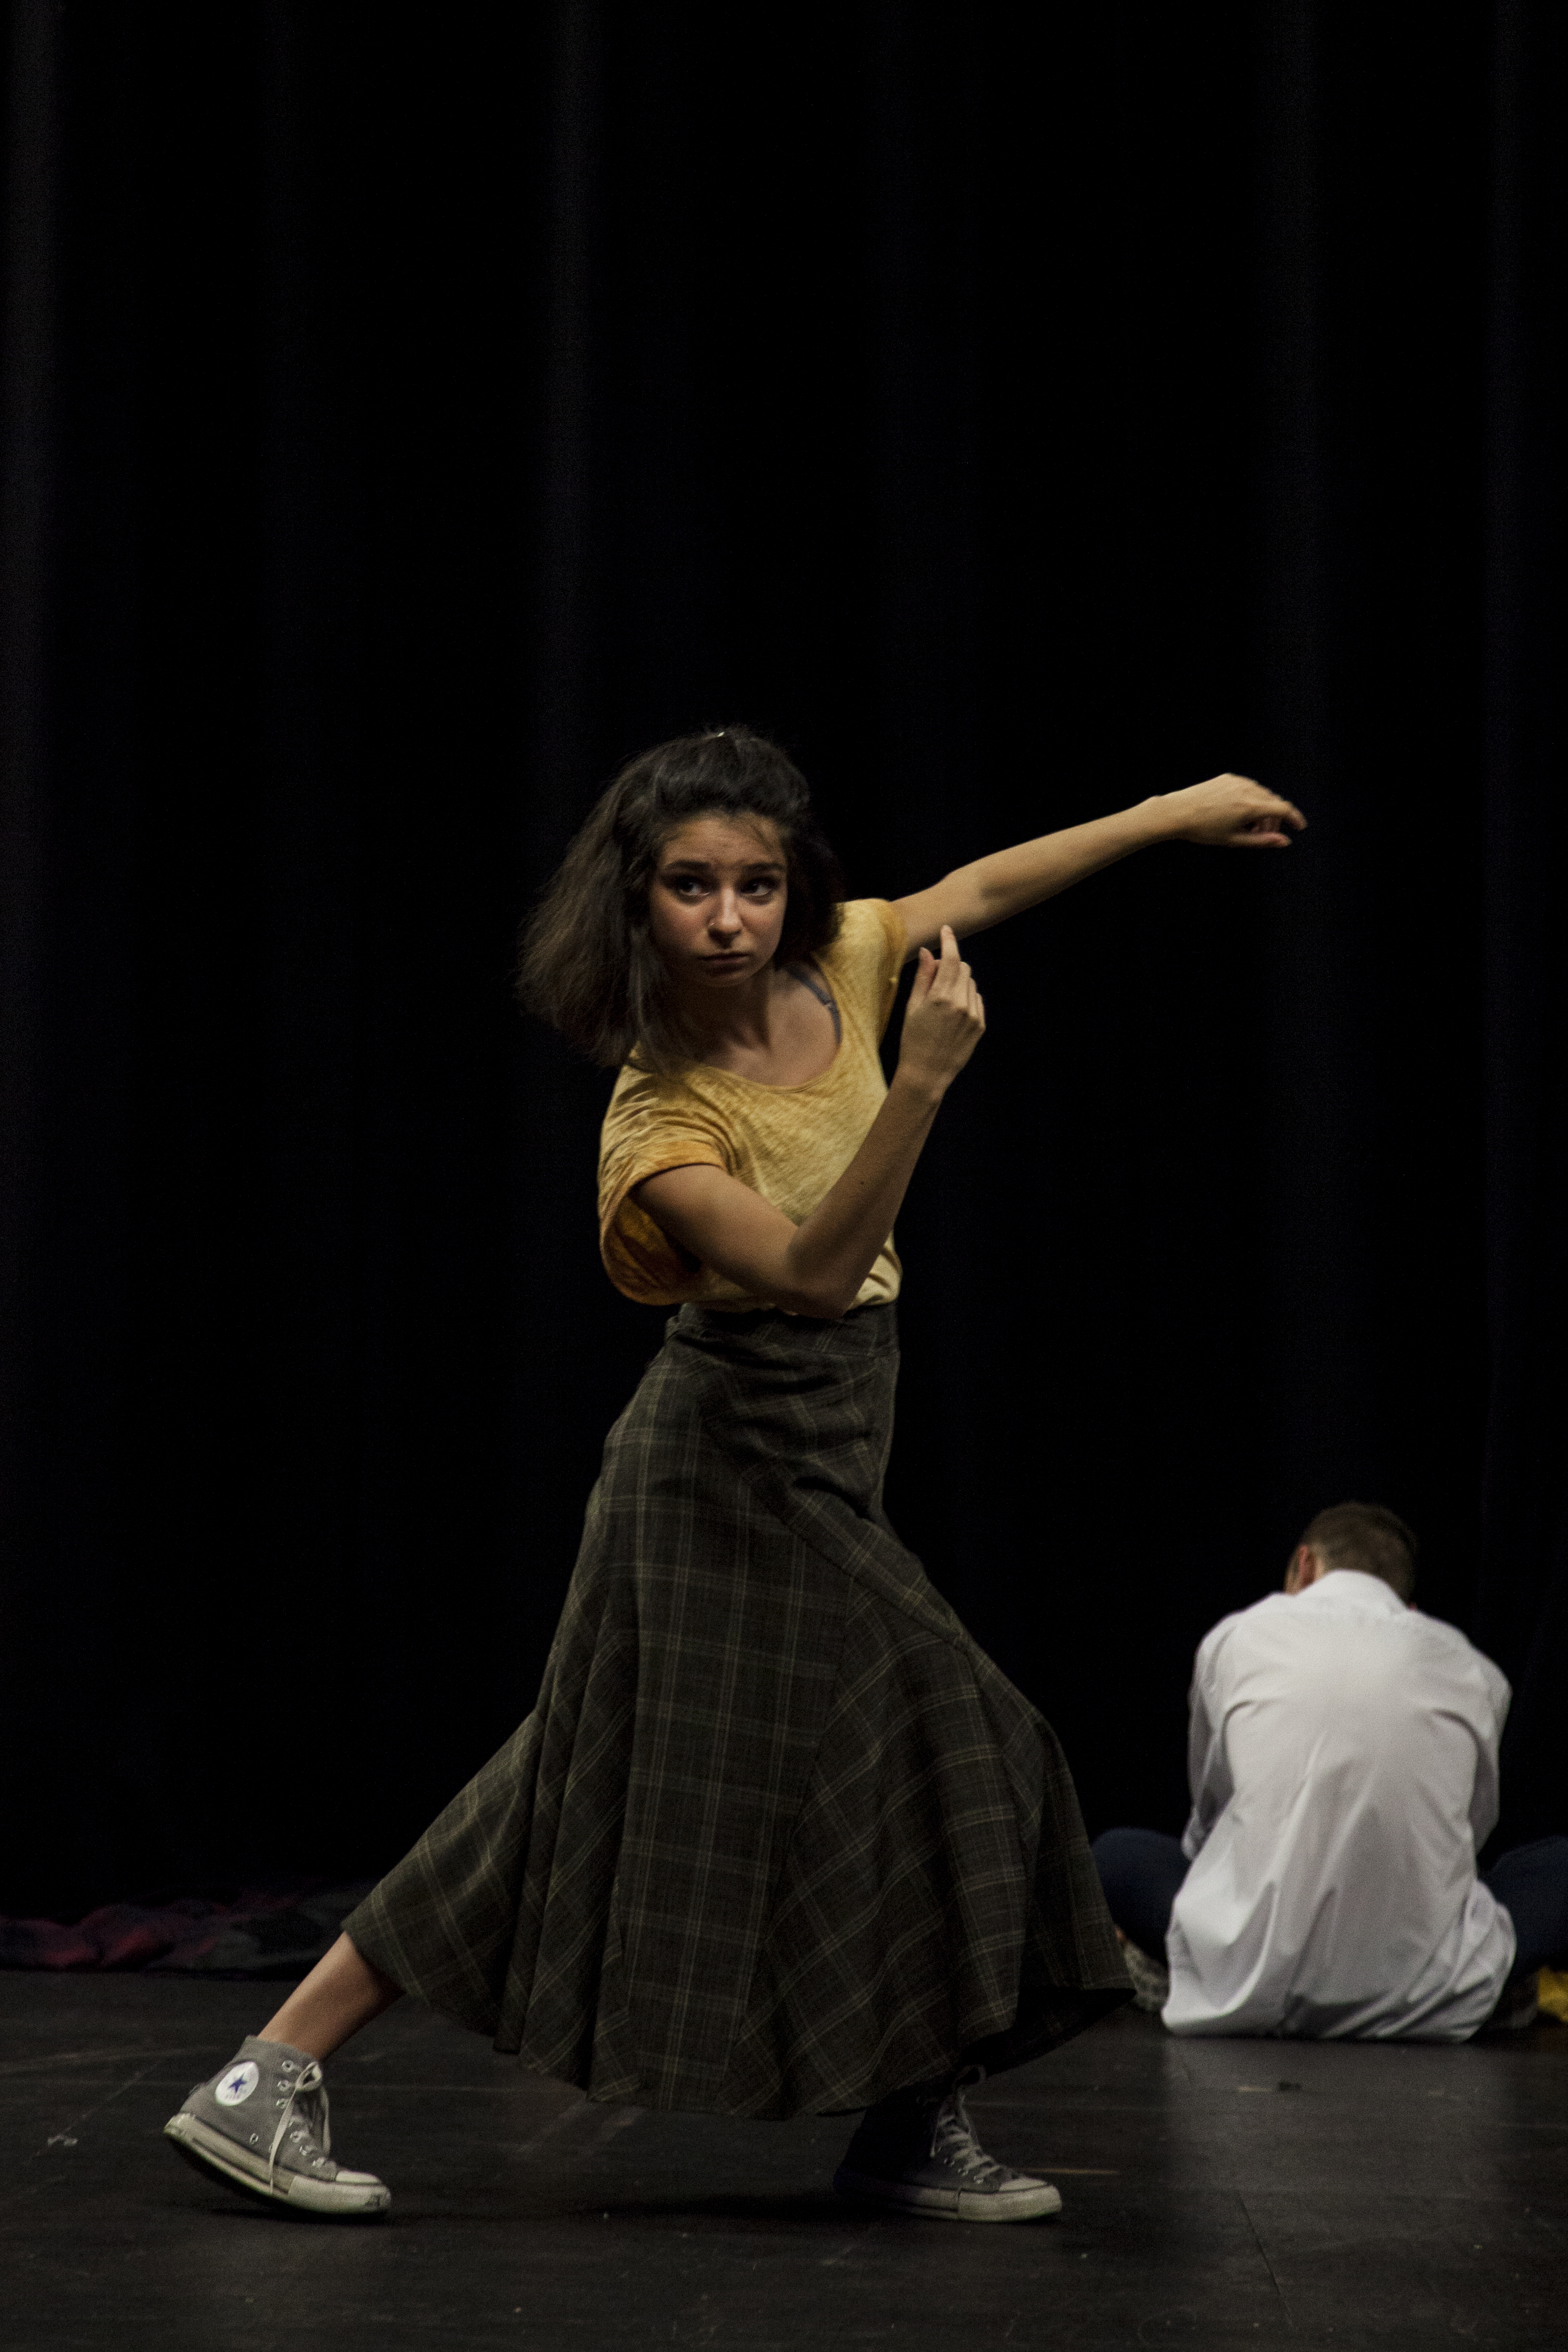 Dance student performing on stage